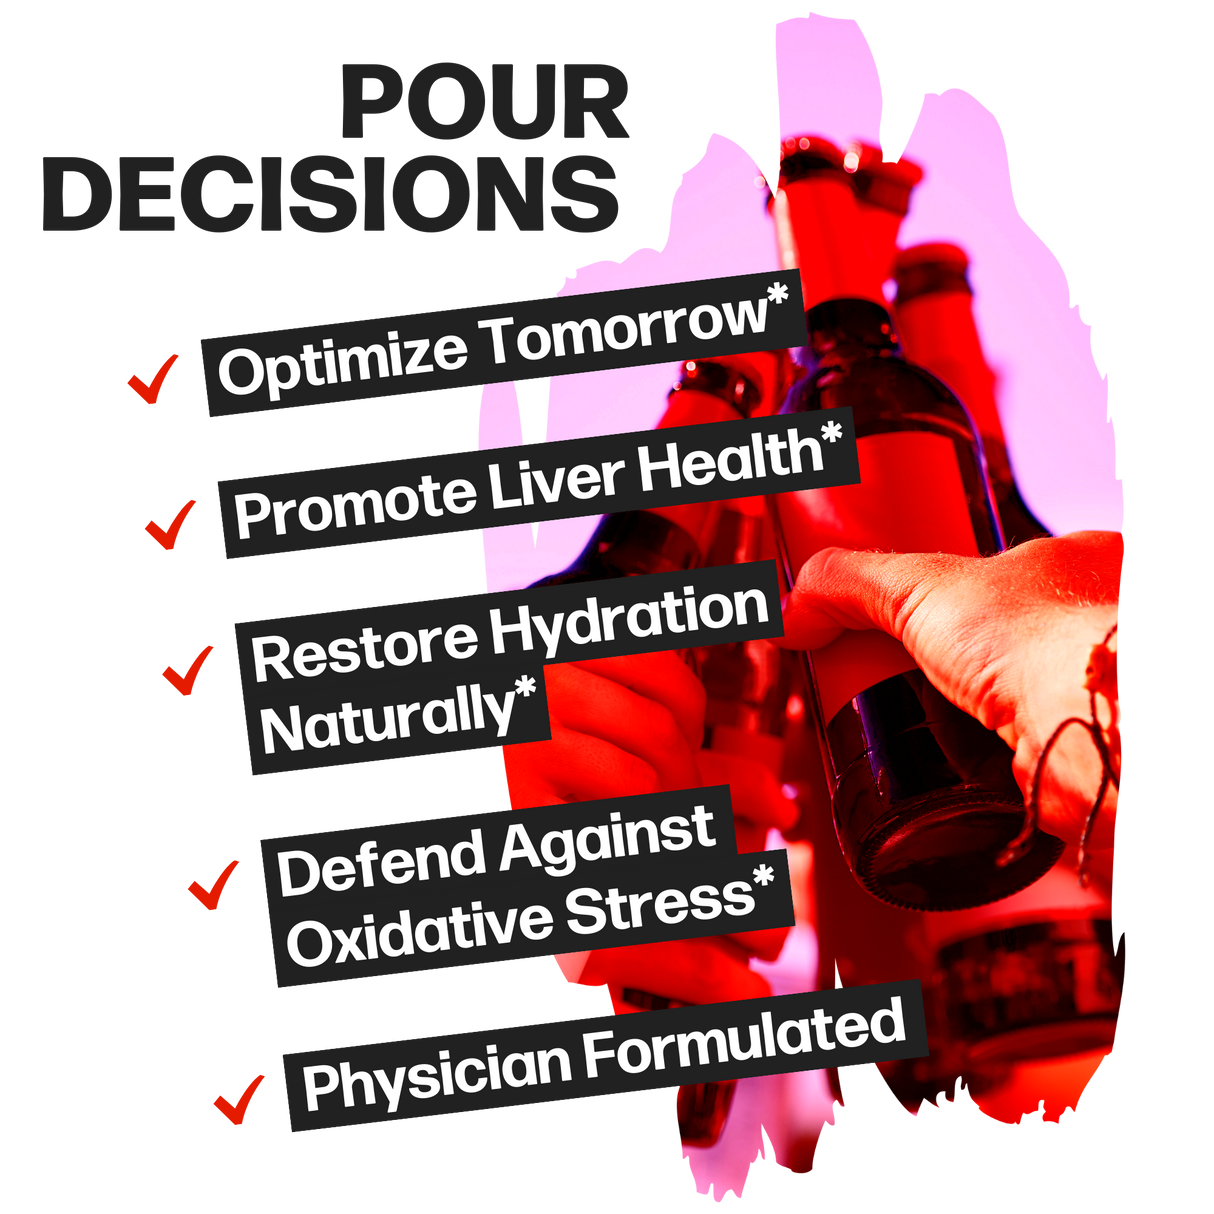 Life Happns Pour Decisions Alcohol Metabolism Supplement Benefits Listed as Optimize Tomorrow, Promote Liver Health, Restore Hydration Naturally, Defend Against Oxidative Stress, and Physician Formulated